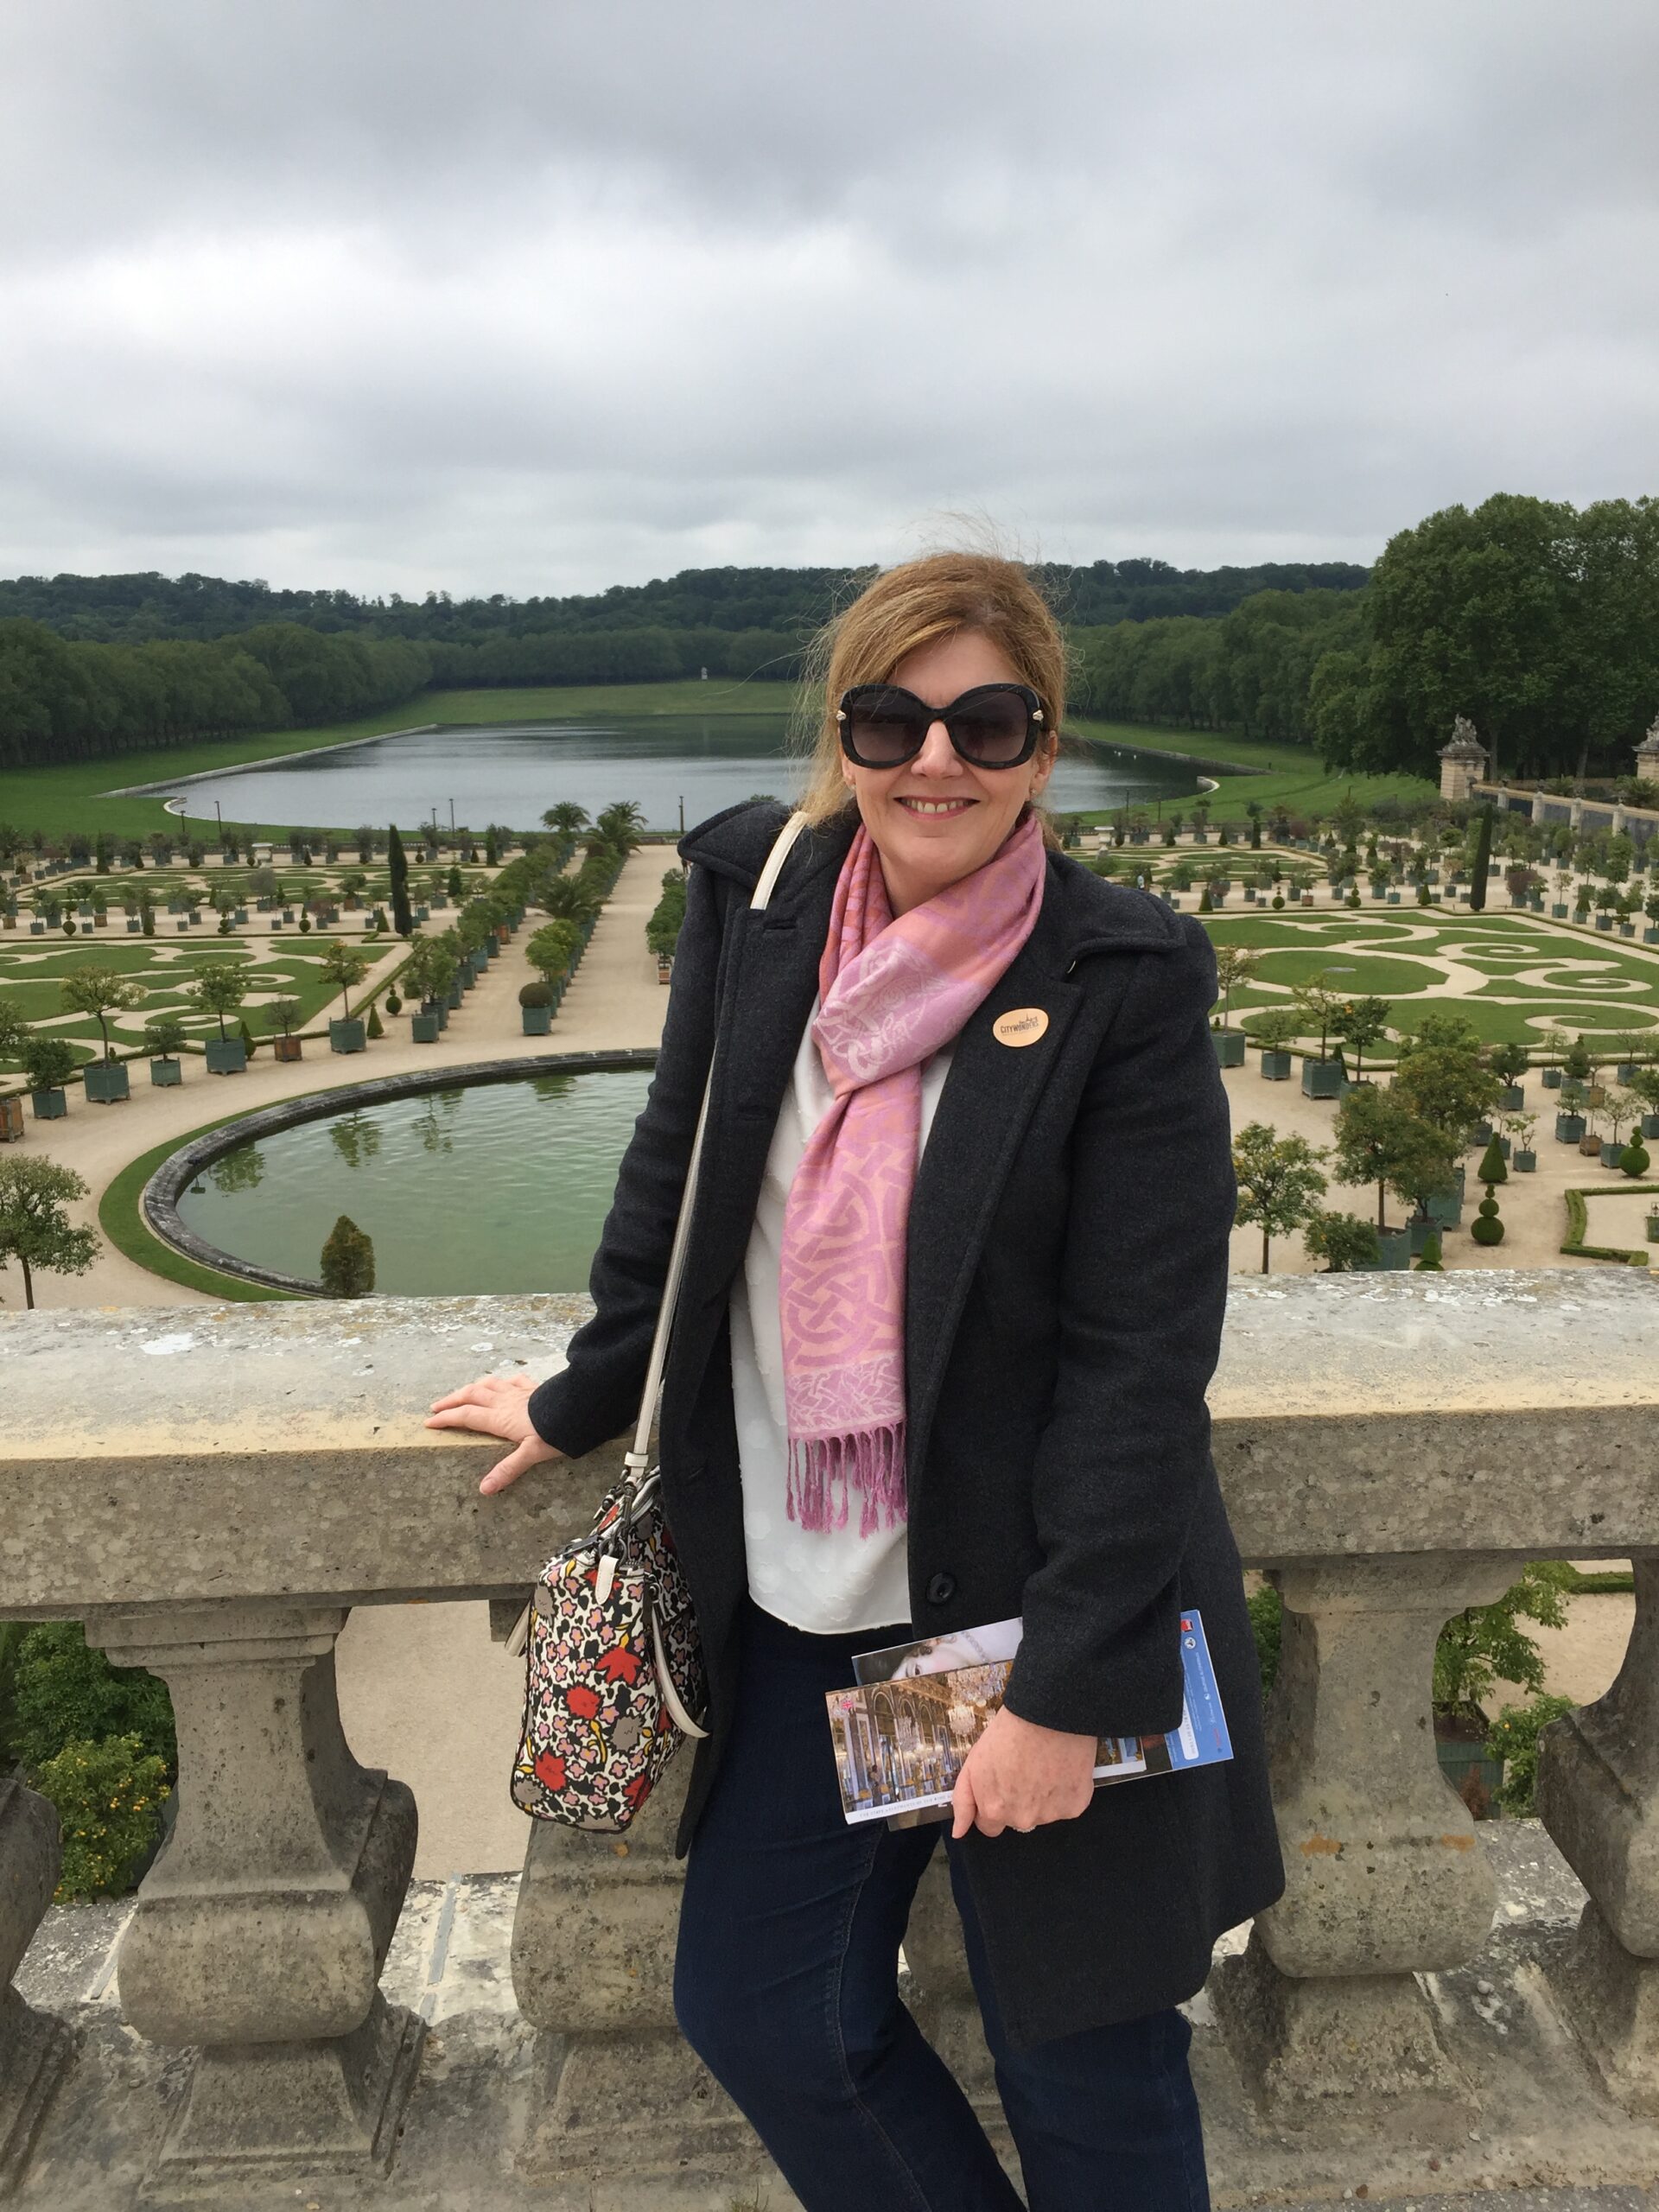 Kelly loves travelling the world and seeing new places. Here she is getting her steps up exploring the Gardens of Versailles in France.